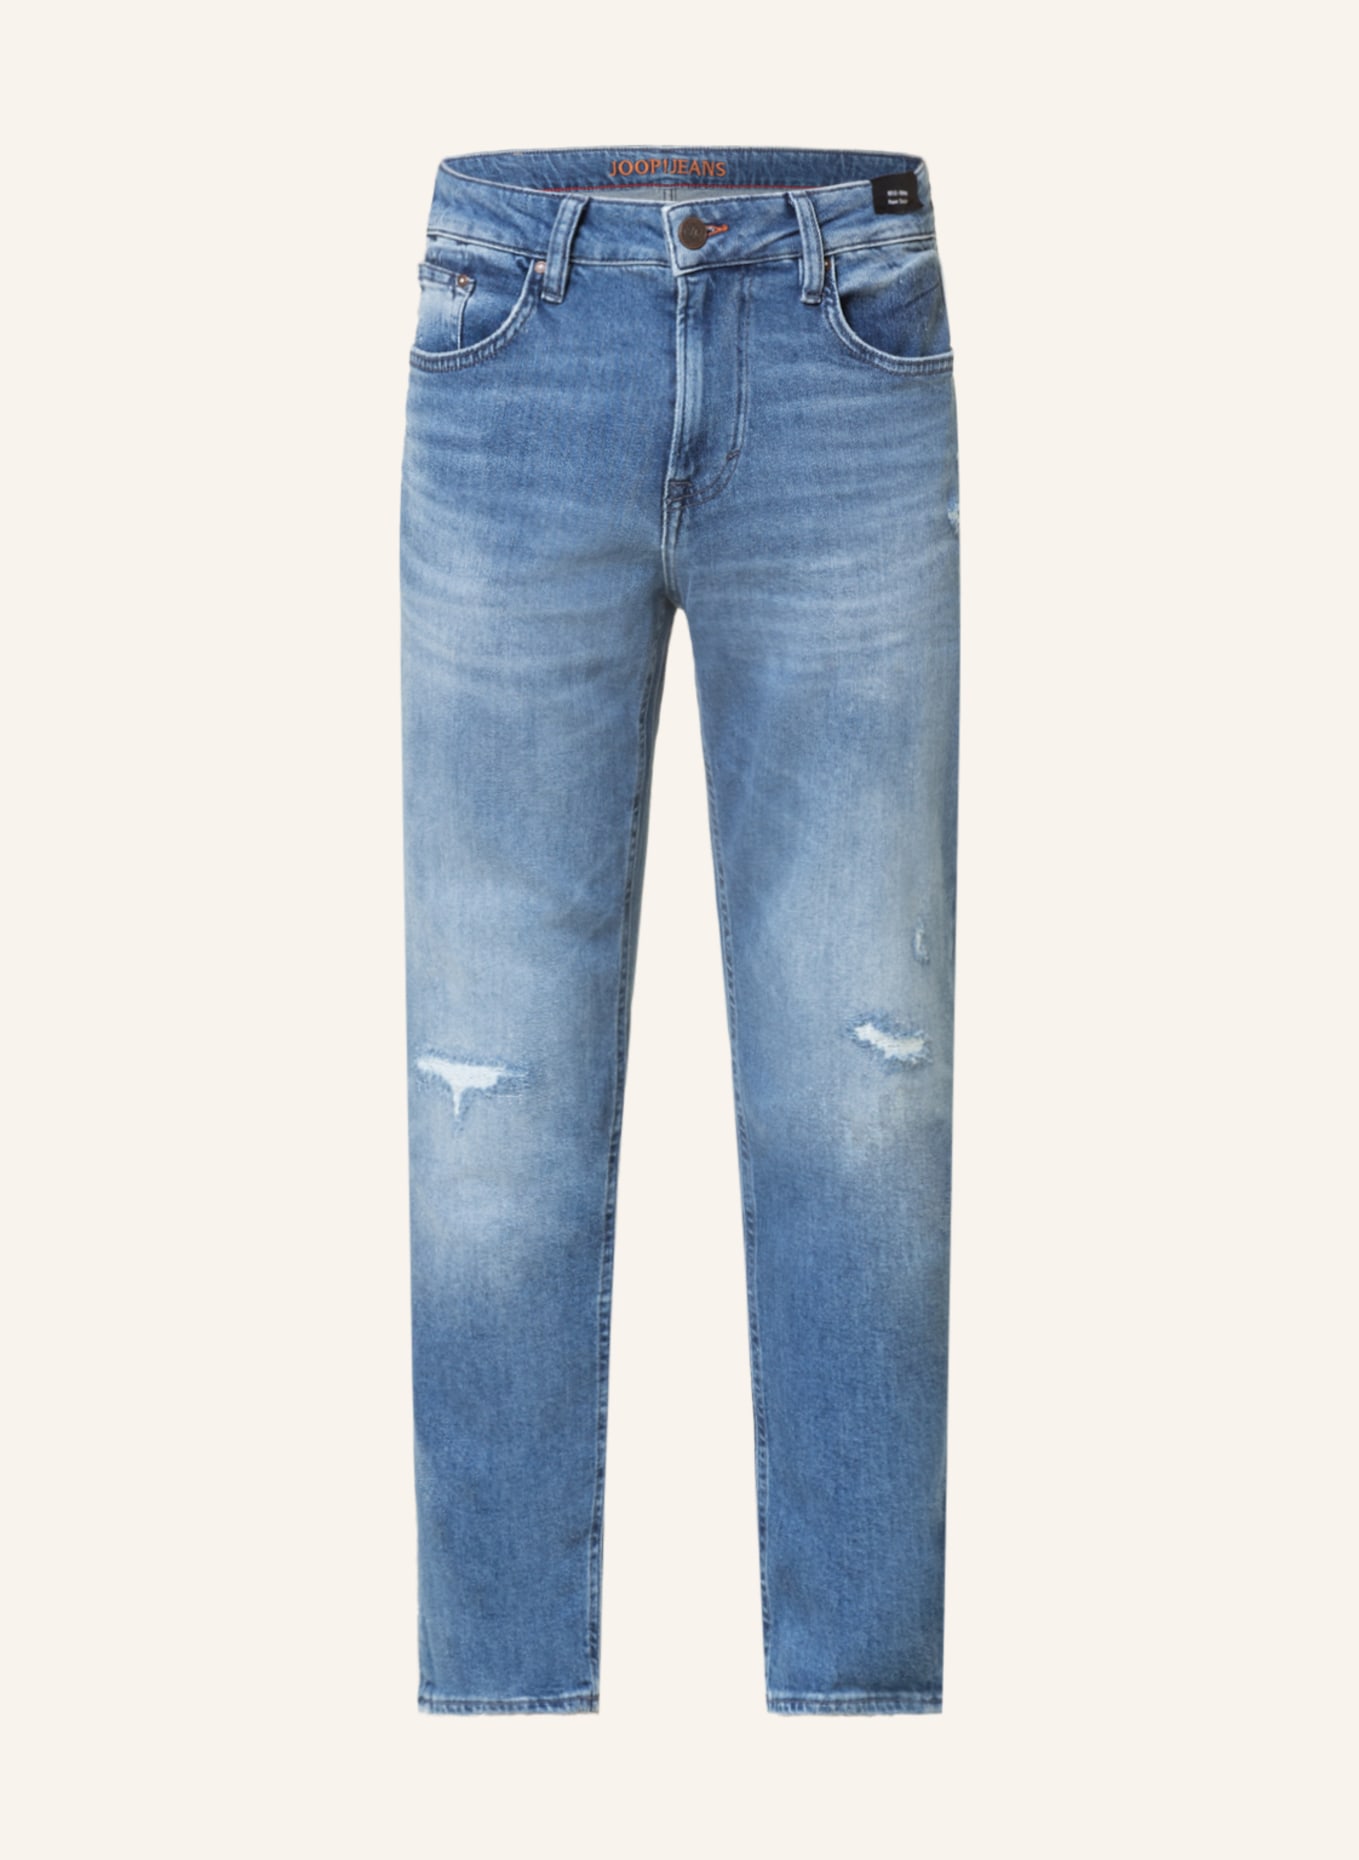 JOOP! JEANS Destroyed Jeans Loose Fit, Farbe: 435 Bright Blue                435(Bild null)